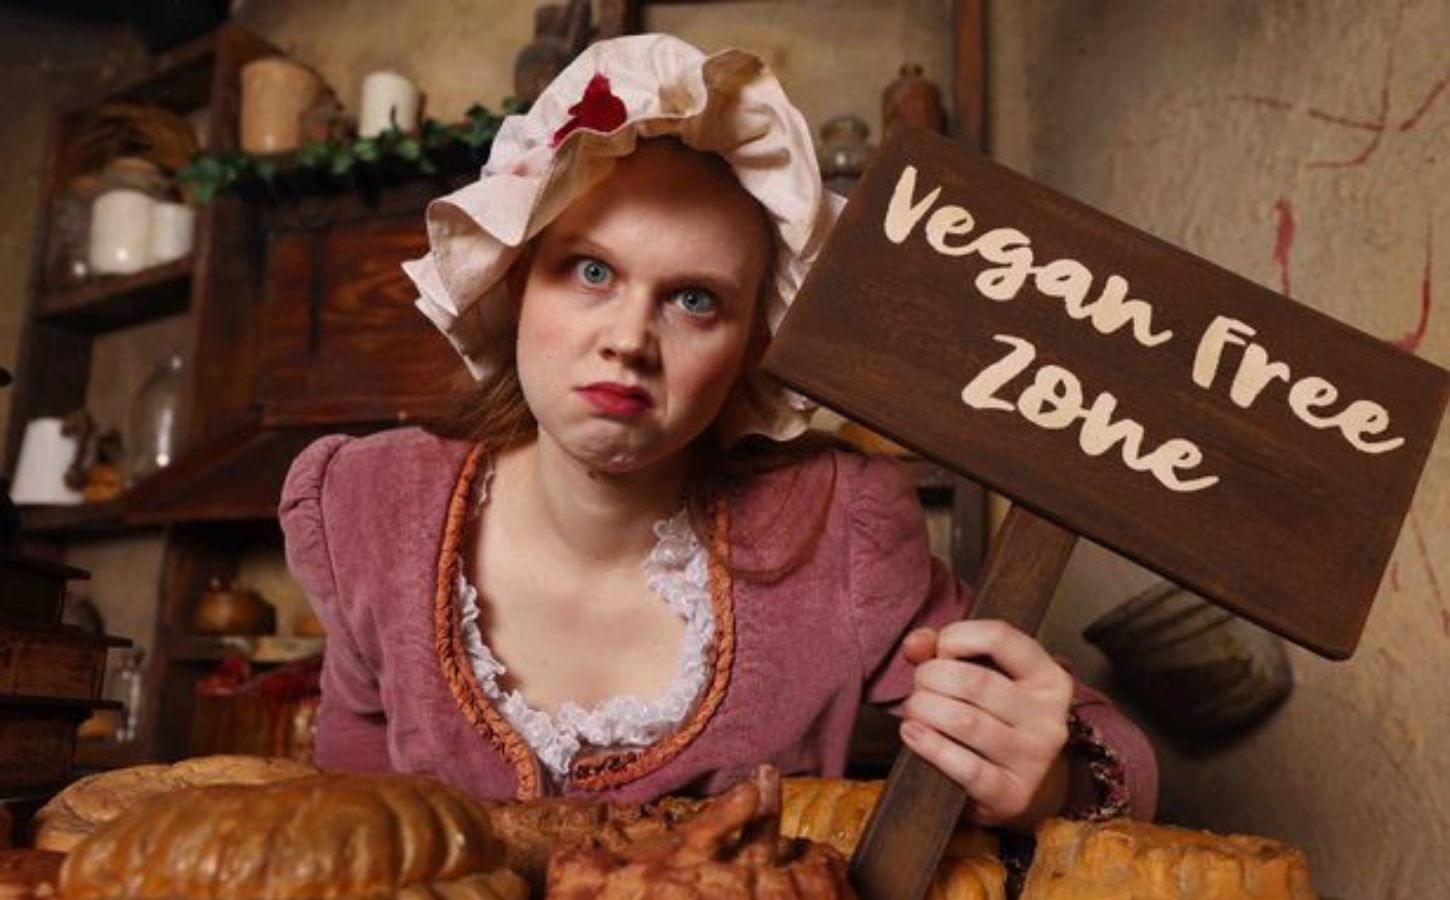 'Mrs Lovett' at London Dungeon holding up a "vegan free zone" sign